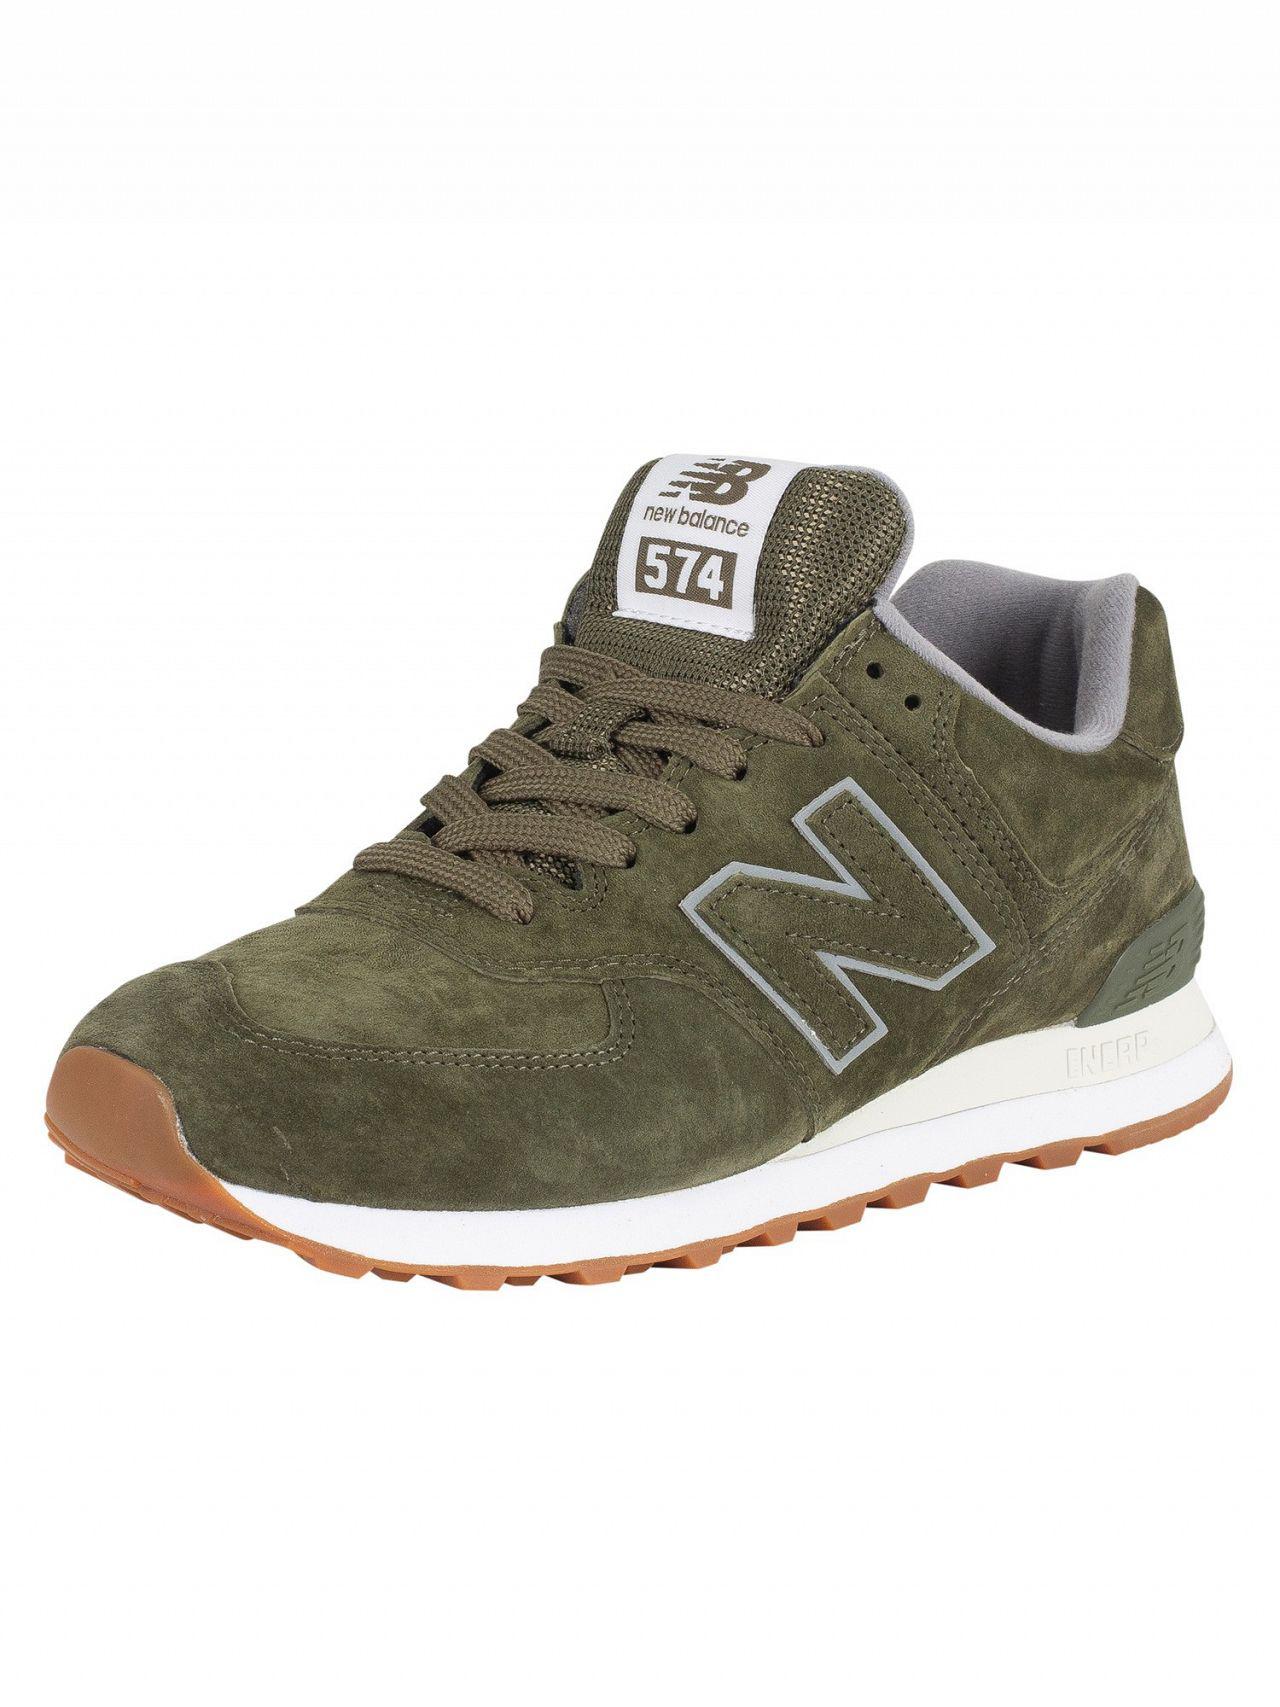 New Balance Suede Mens Dark Covert Green 574 Classic Trainers for Men | Lyst